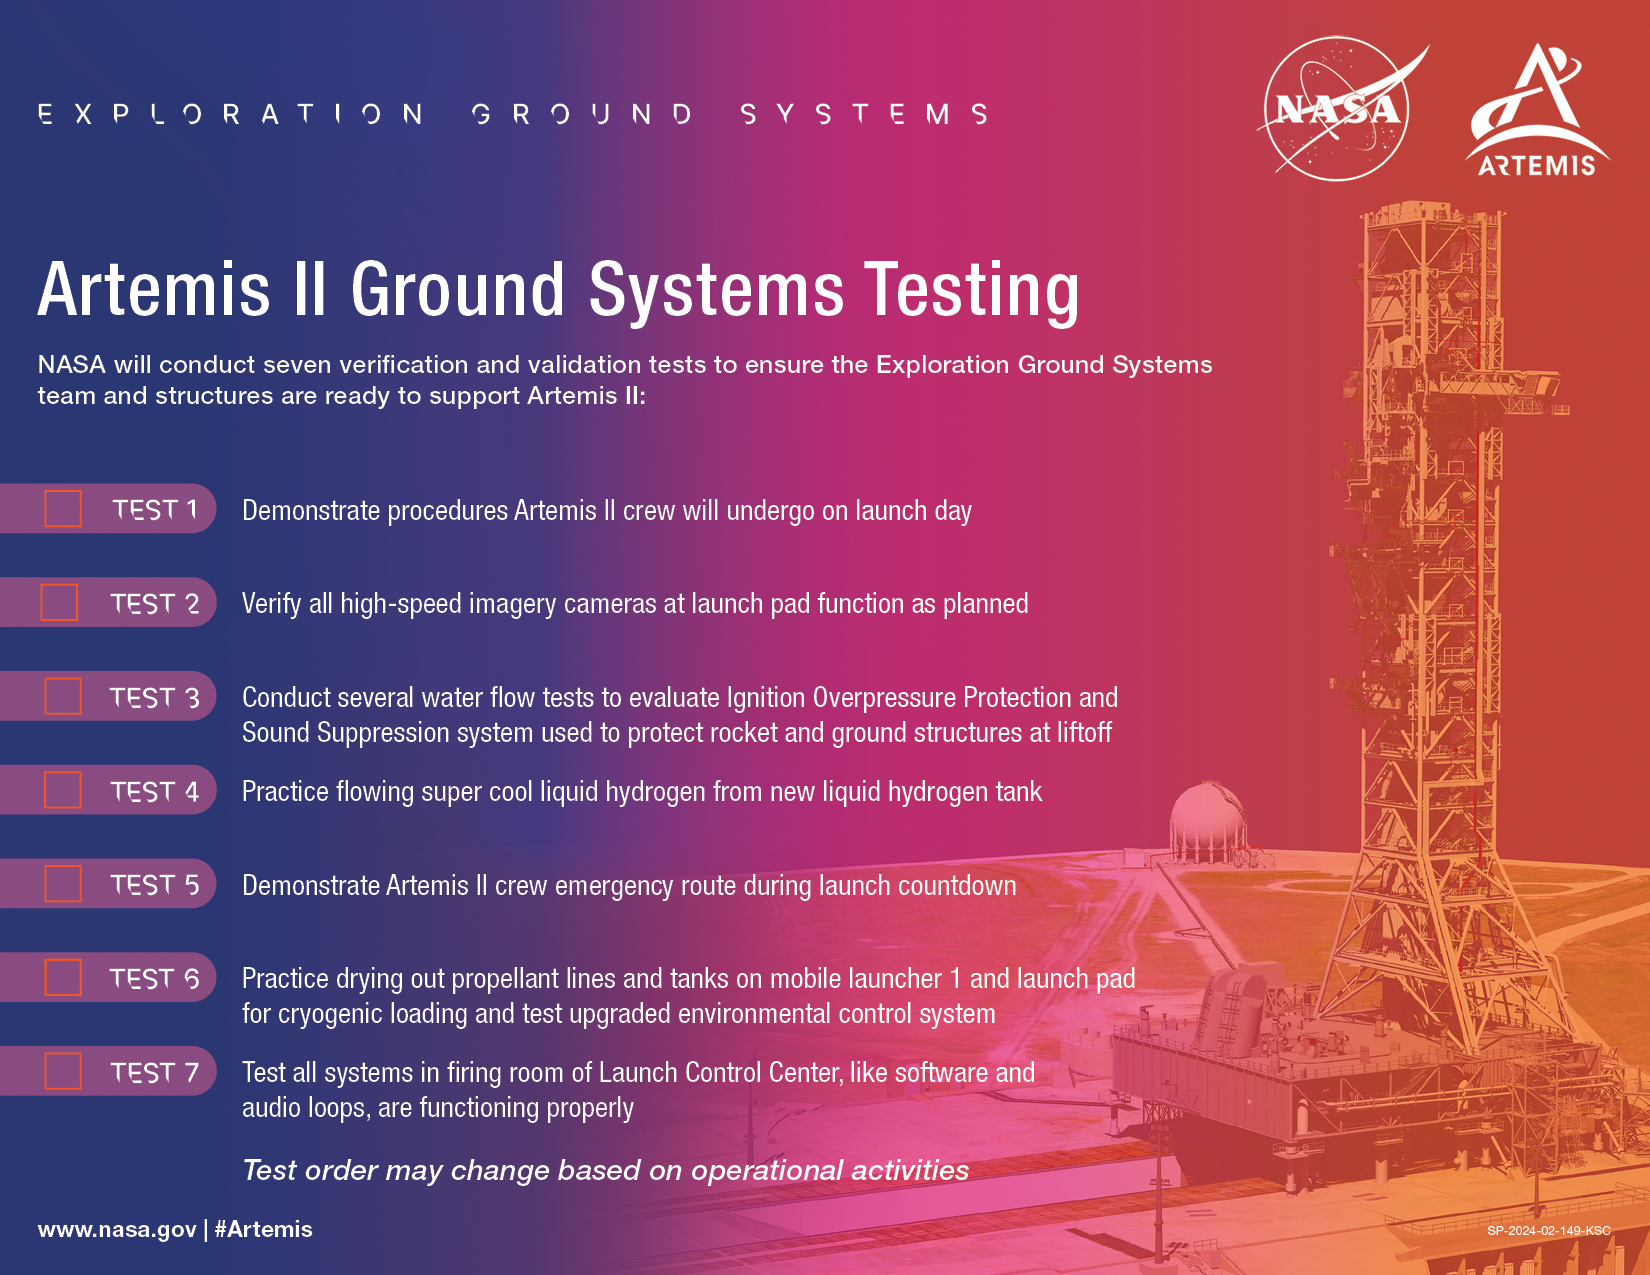 Graphic describing the Artemis II Ground Systems Tests